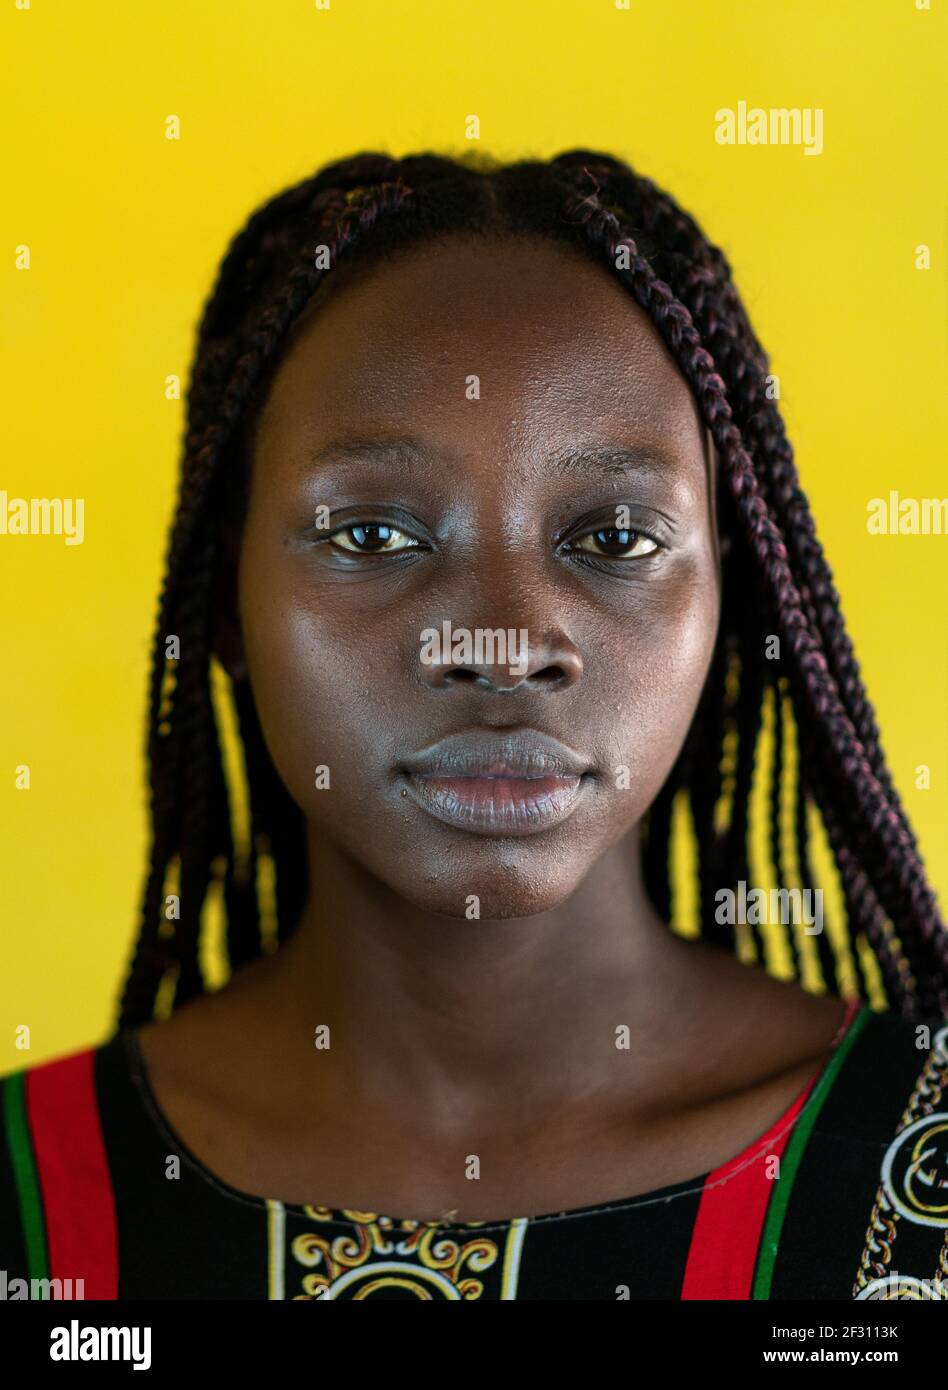 Young black African woman closeup a portrait Stock Photo - Alamy